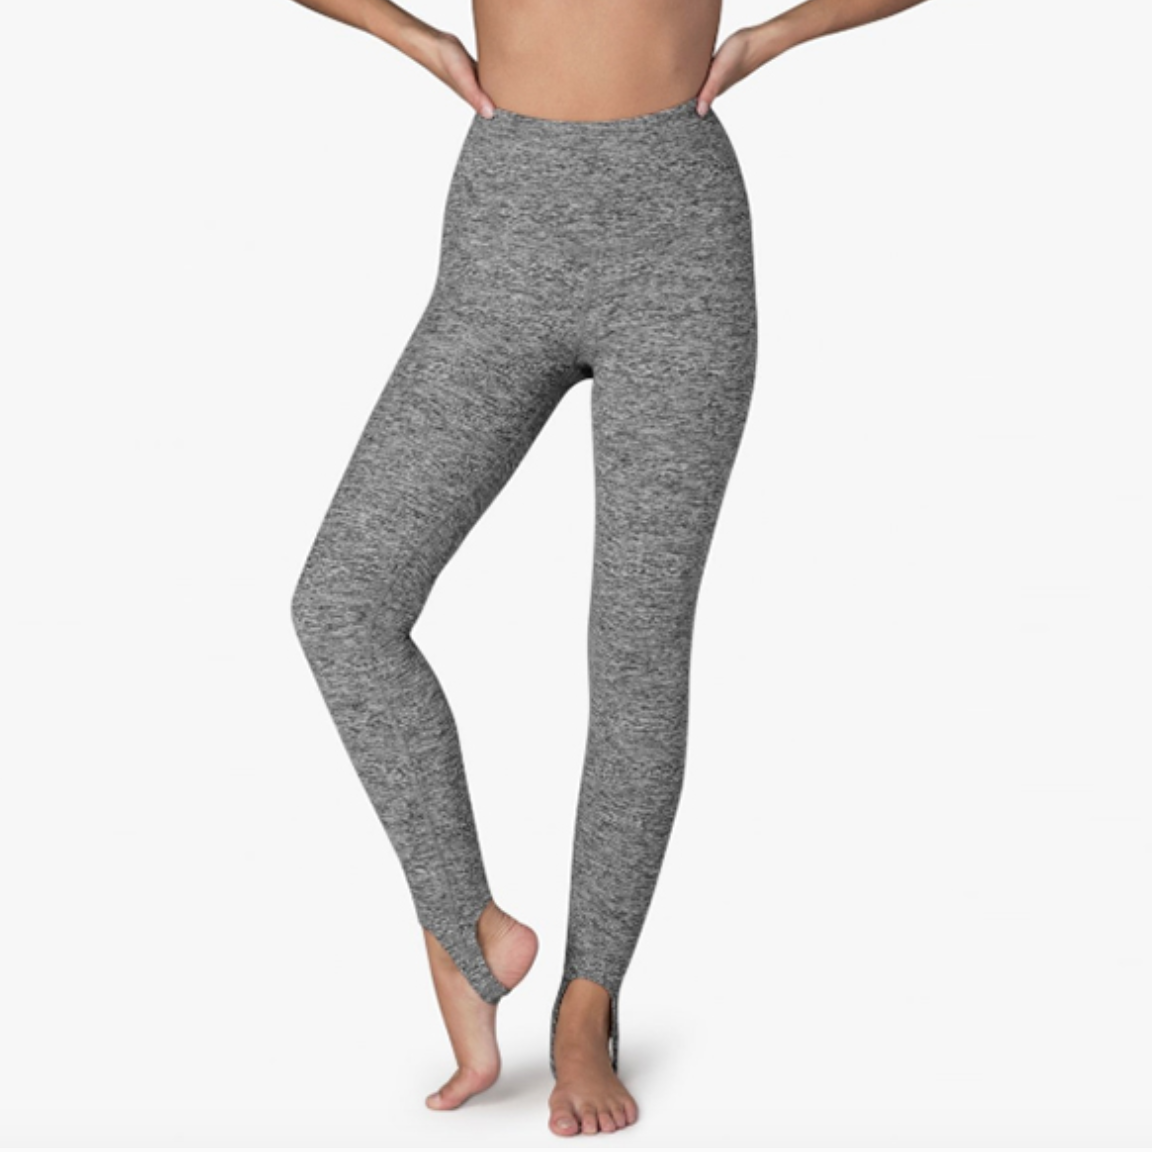 What you need to know about HOT YOGA + 8 BEST LEGGINGS